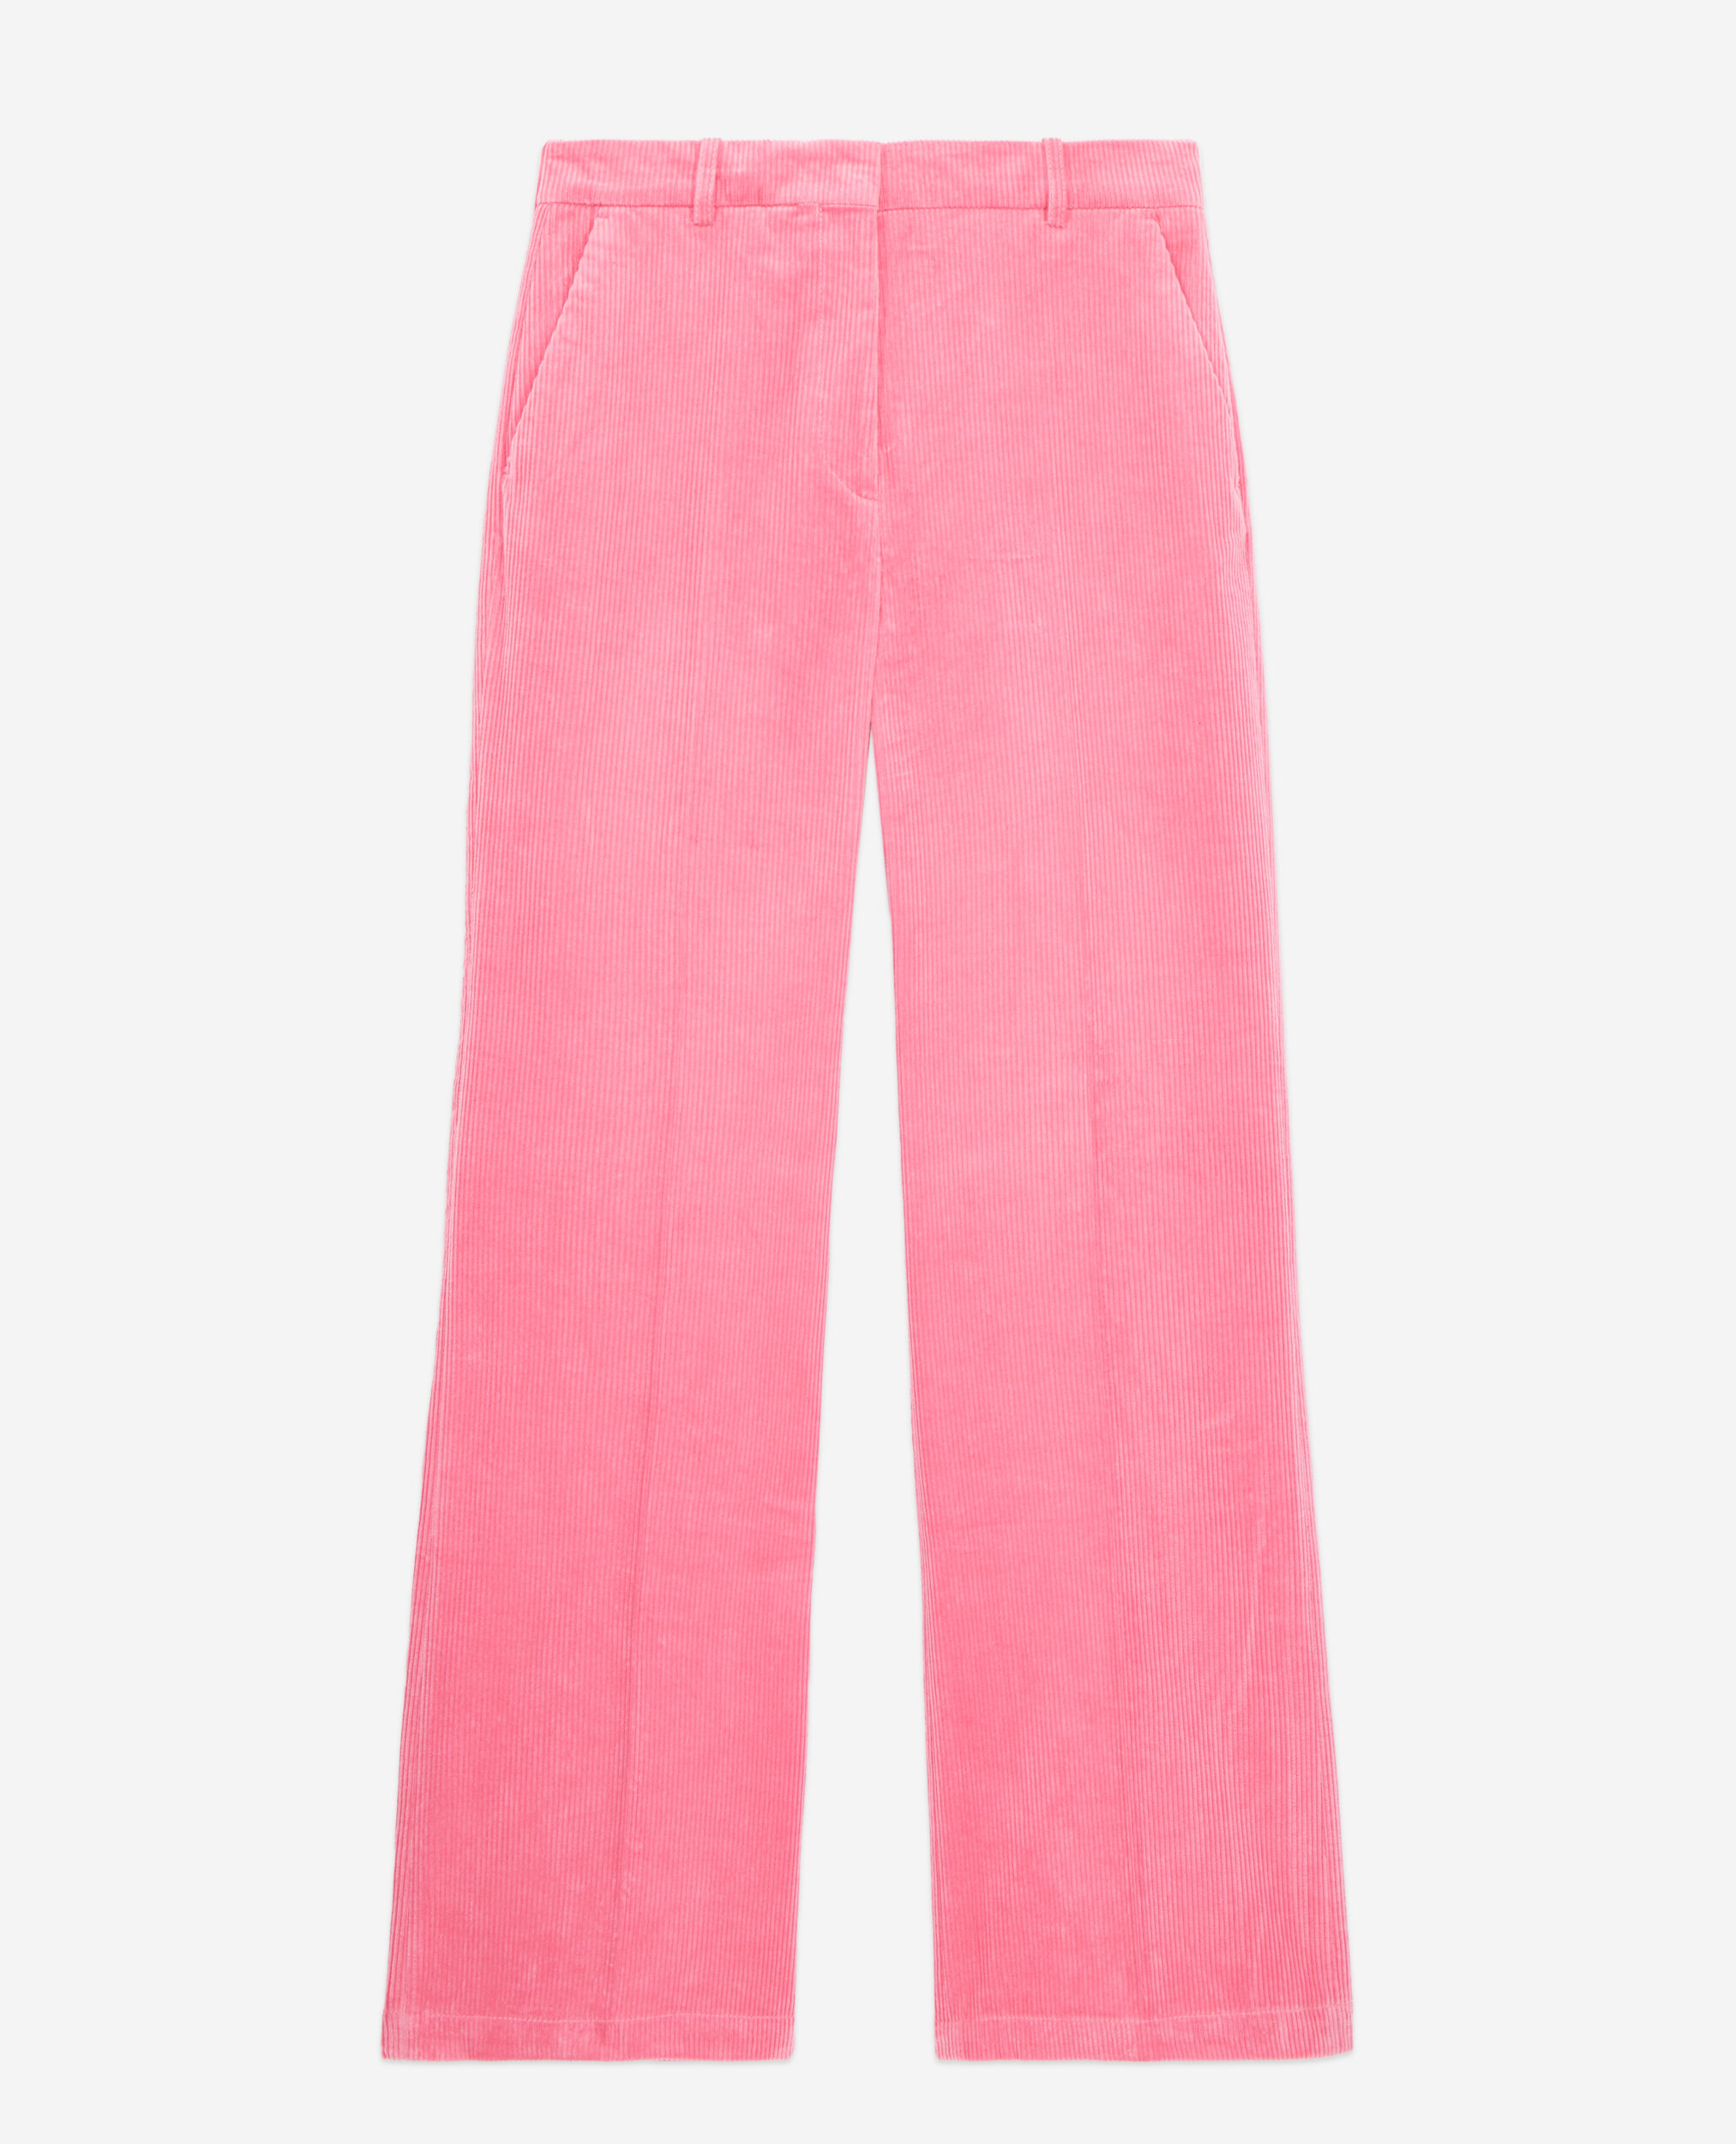 Pink corduroy trousers, OLD PINK, hi-res image number null